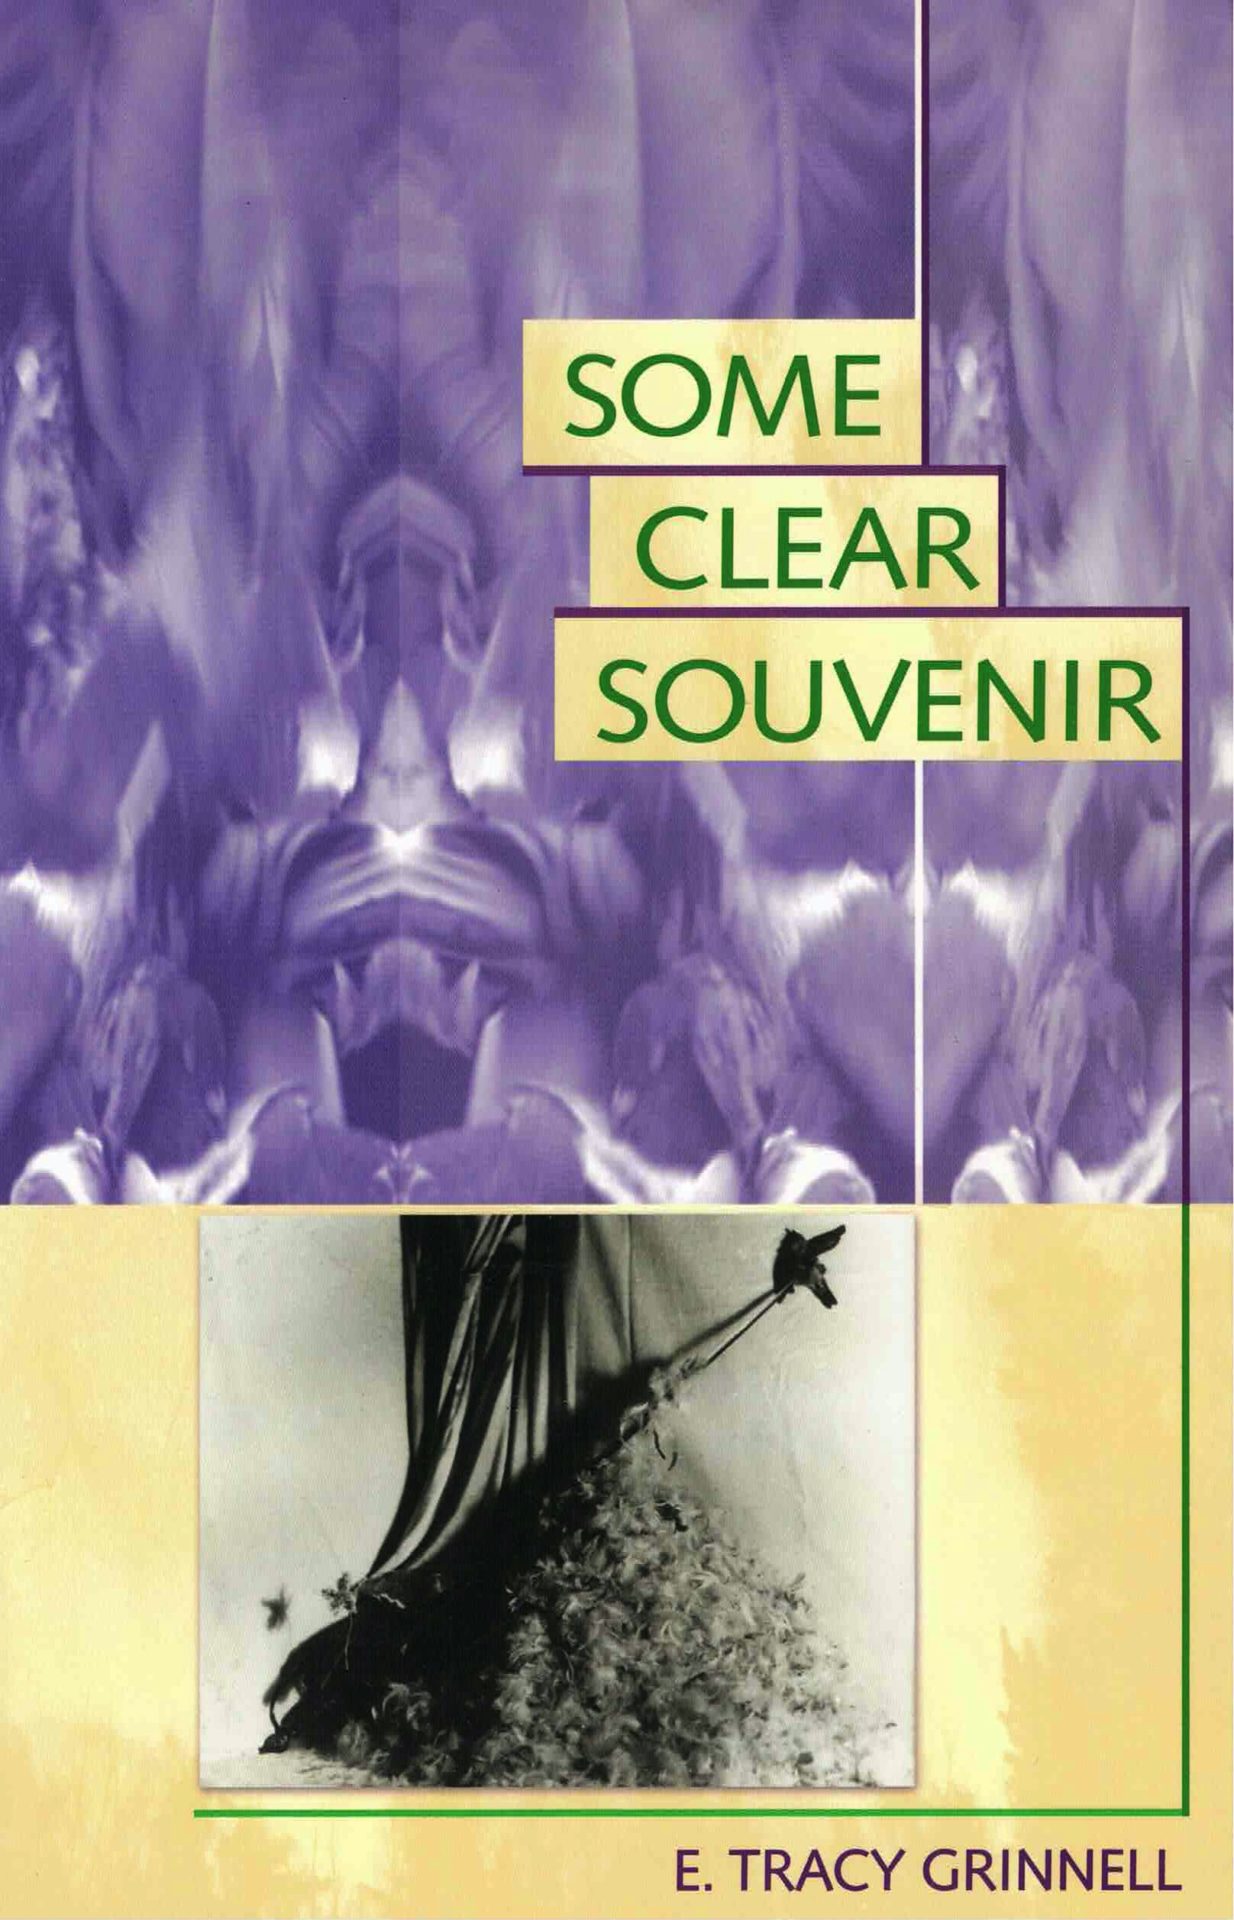 cover of Some Clear Souvenir by E. Tracy Grinnell, lavender purple textured image on top of a b&w image of the fabrics and textures